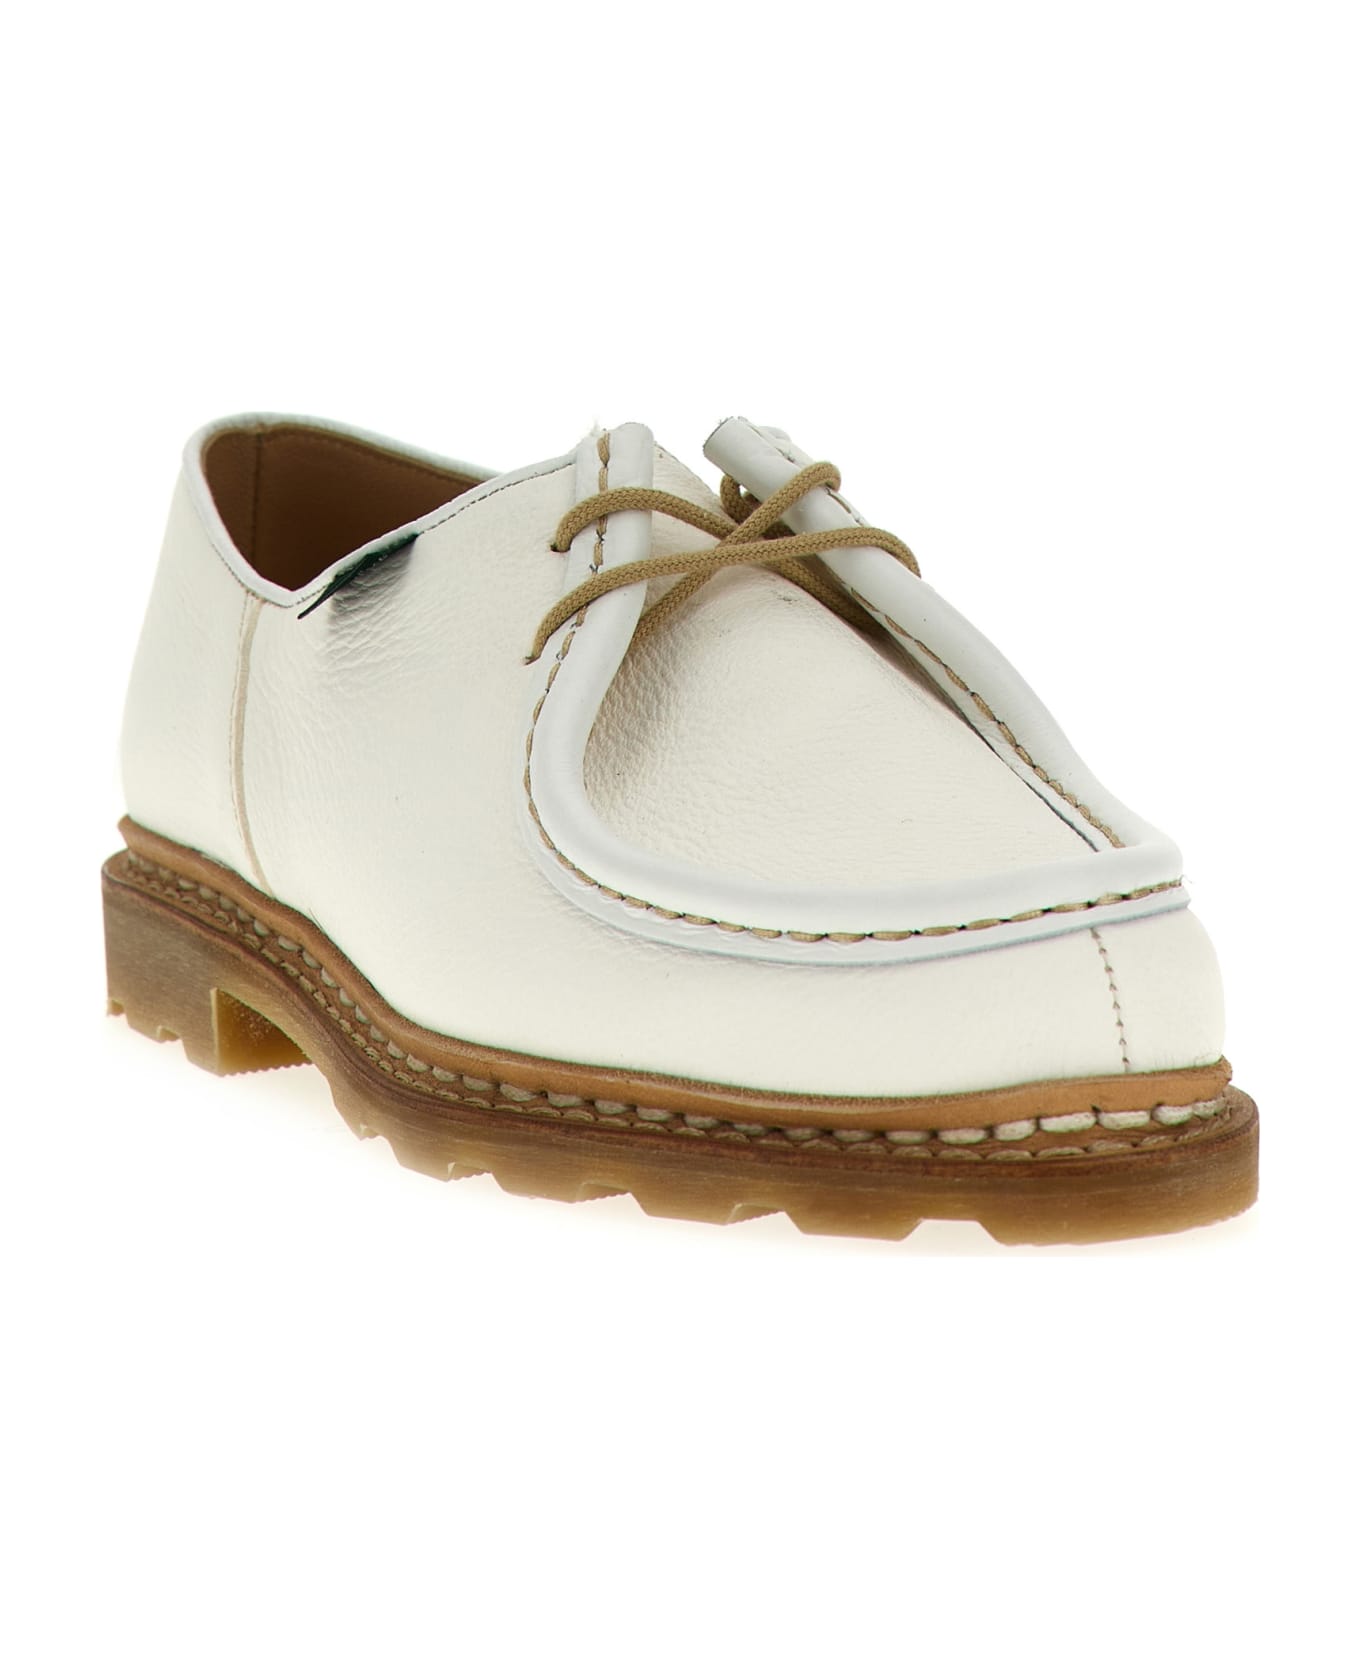 Paraboot 'michael' Derby Shoes - White